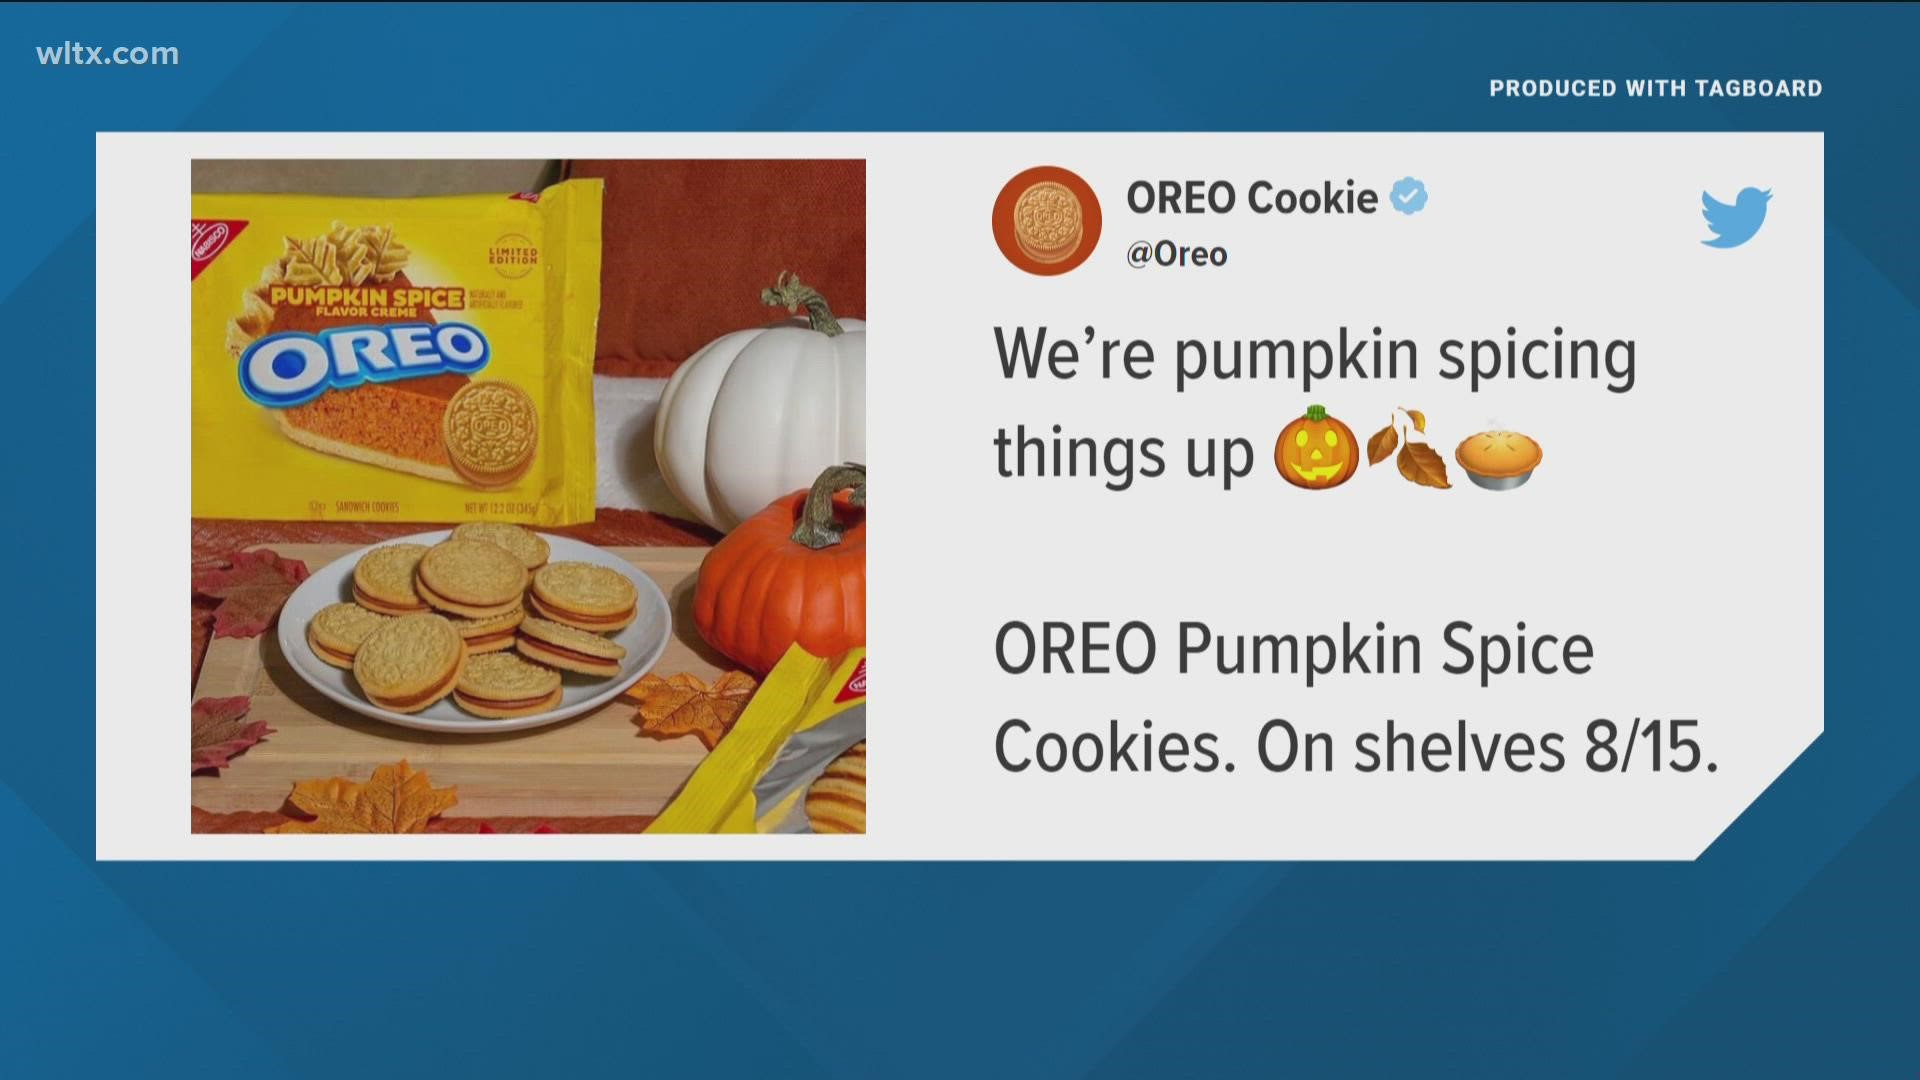 The cookie, which has pumpkin spice cream sandwiched between two golden Oreos, will hit shelves on Aug. 15, the brand announced on social media on Wednesday.